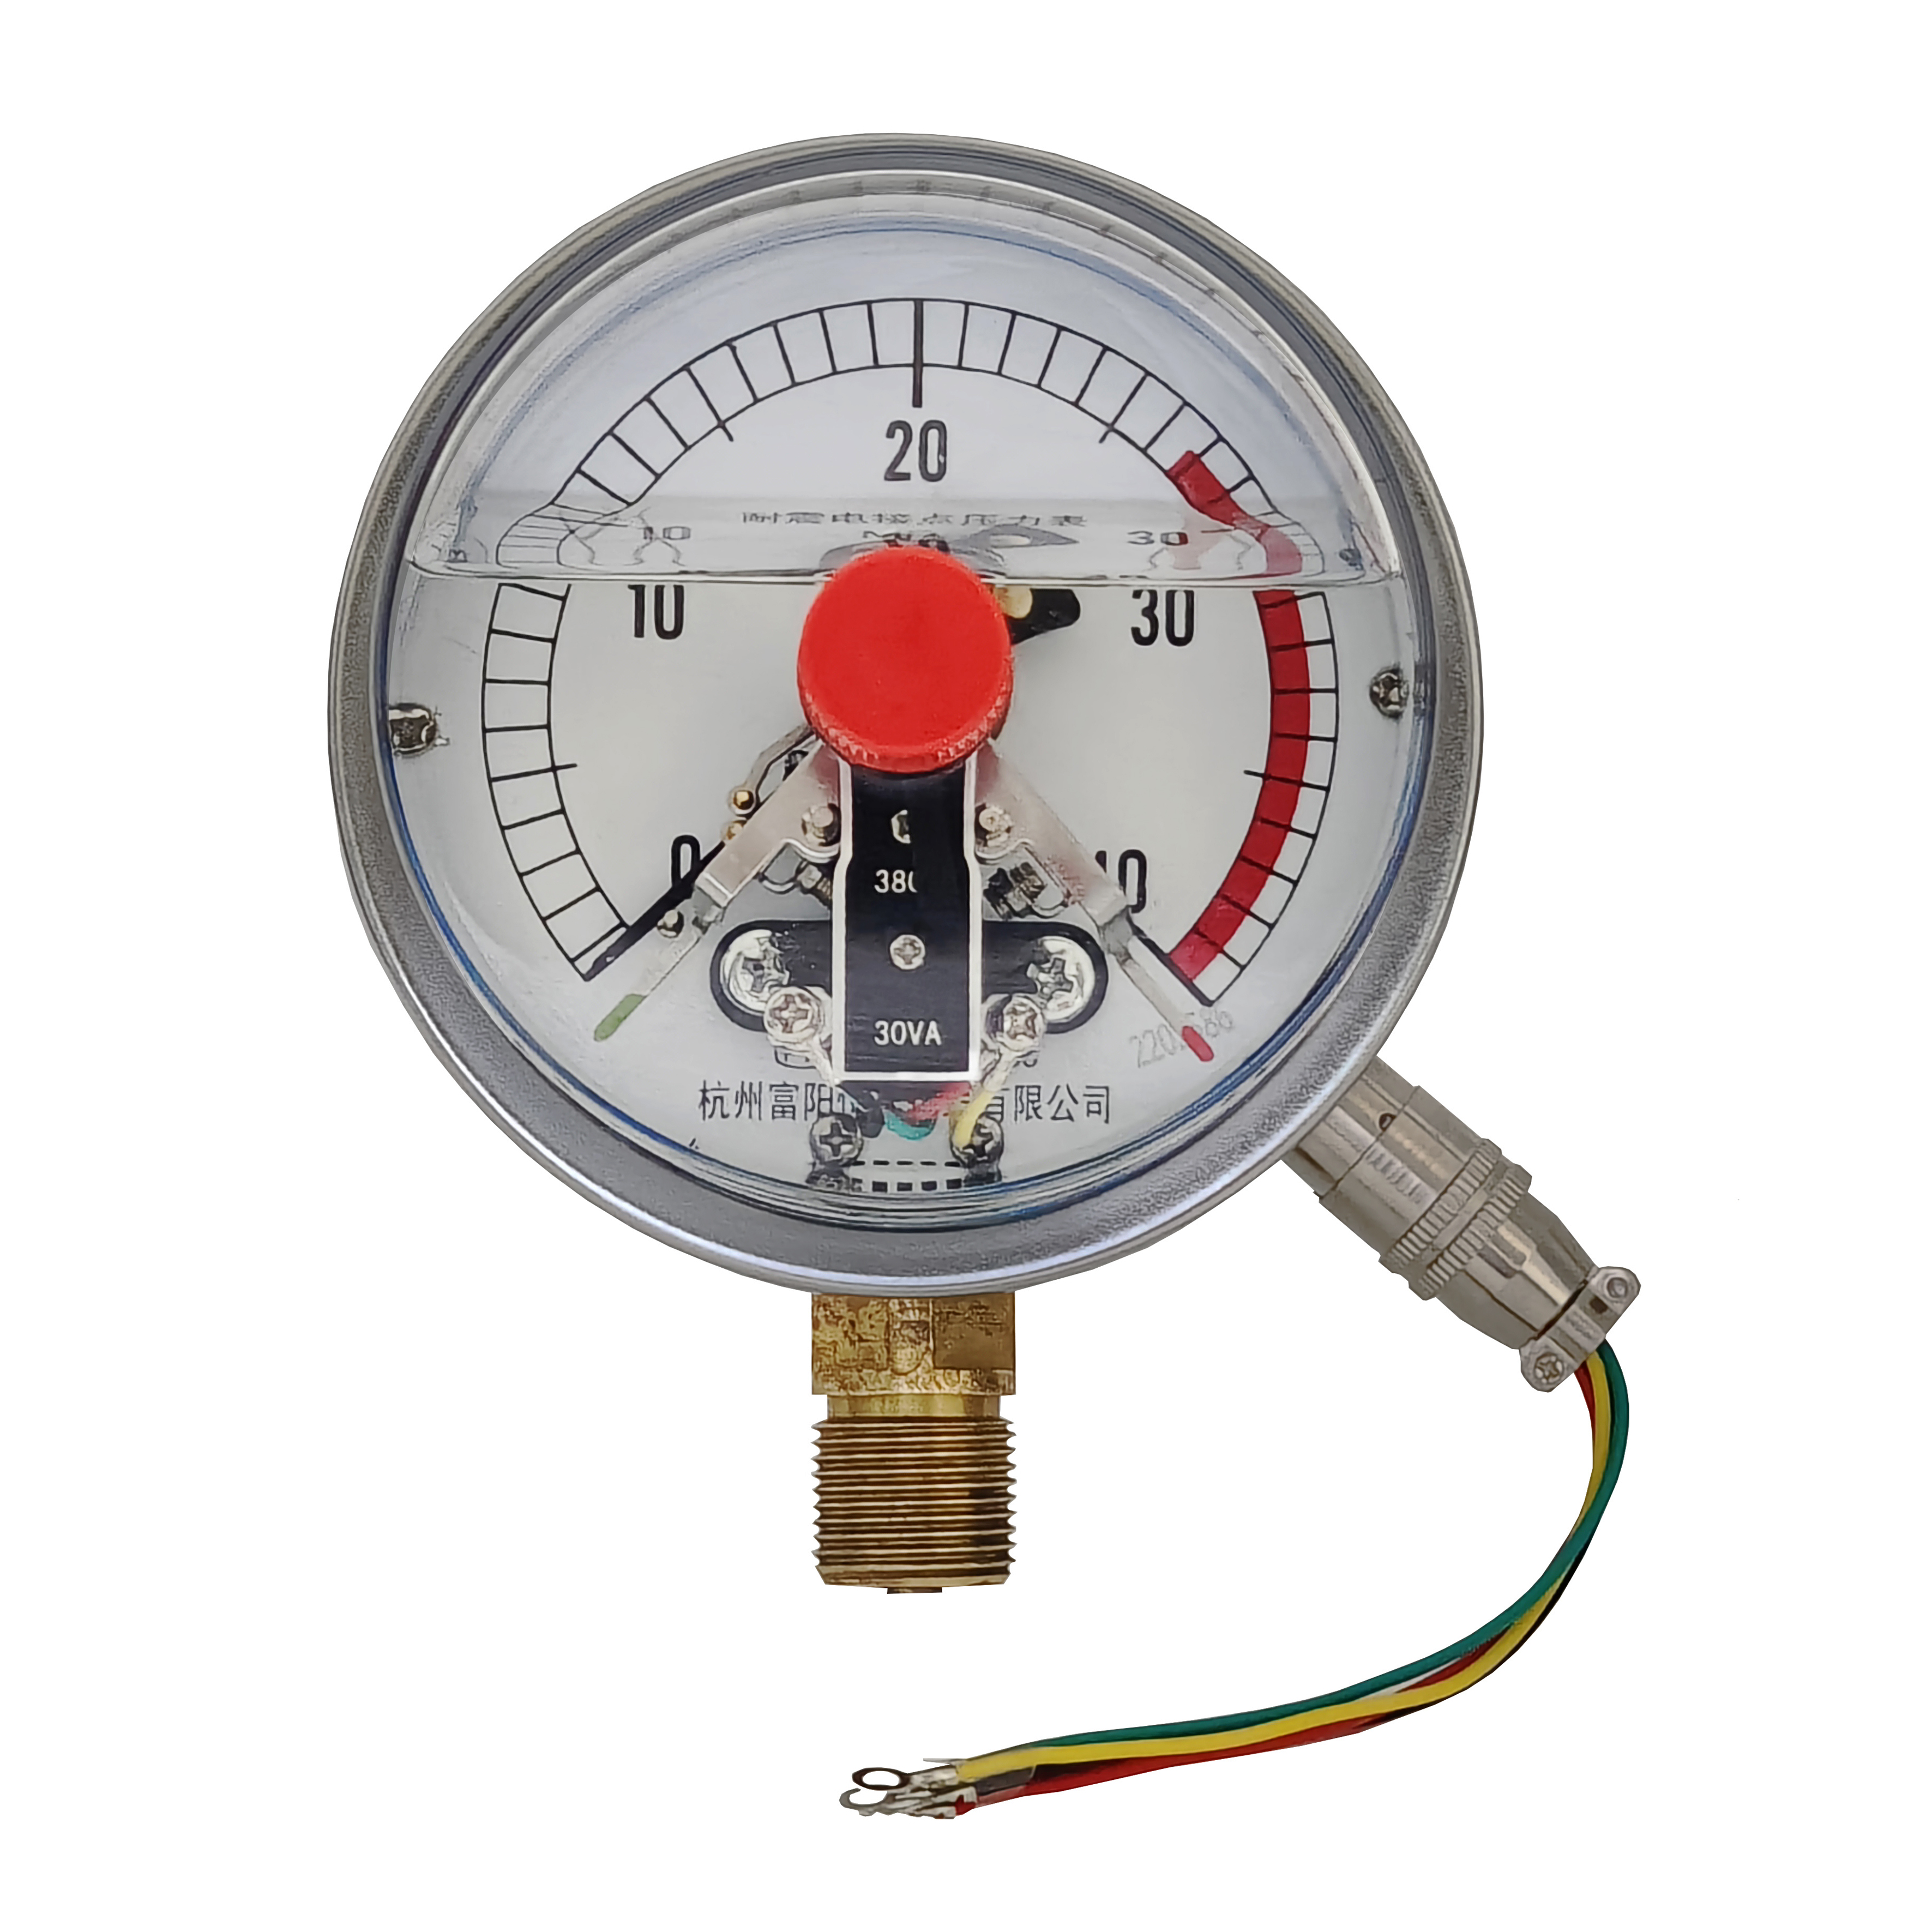 YNXC Liquid Filled Magneto Electric Contact Pressure Gauge